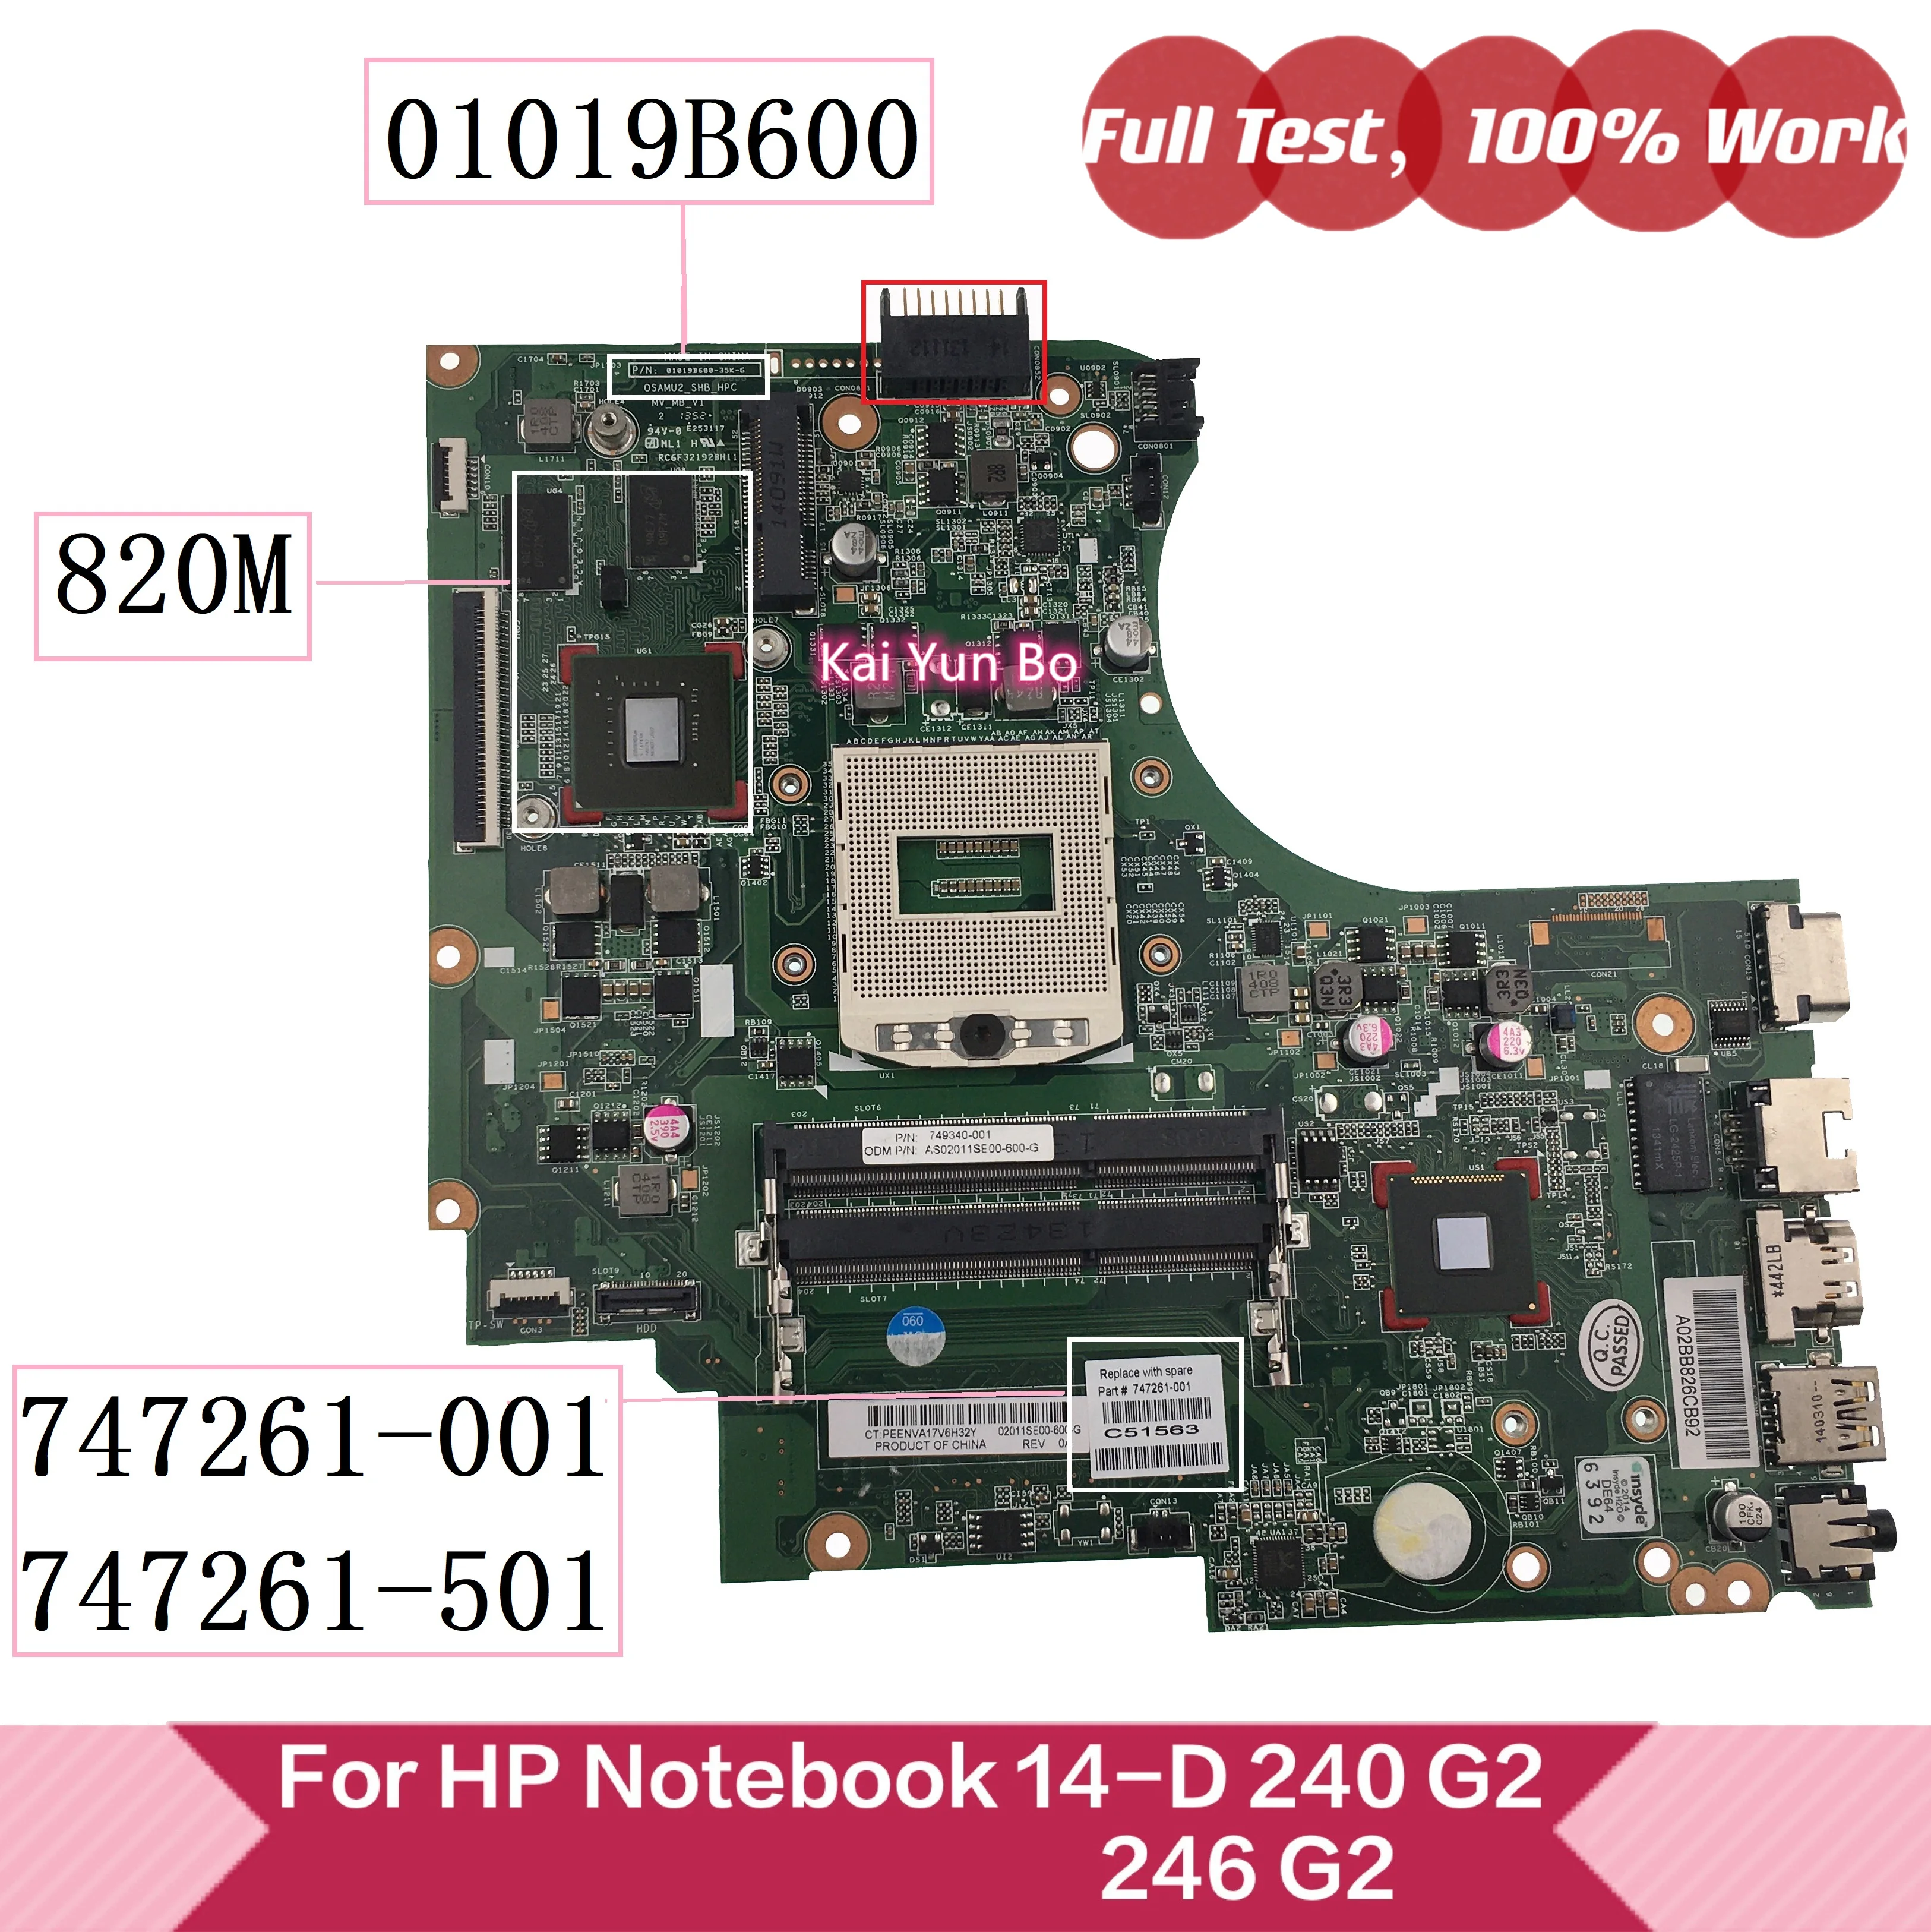 

Mainboard 01019B600 For HP Notebook 14-D 240 G2 246 G2 Laptop Motherboard 747261-001 747261-501 With N15V-GM-S-A2 GPU Tesed OK